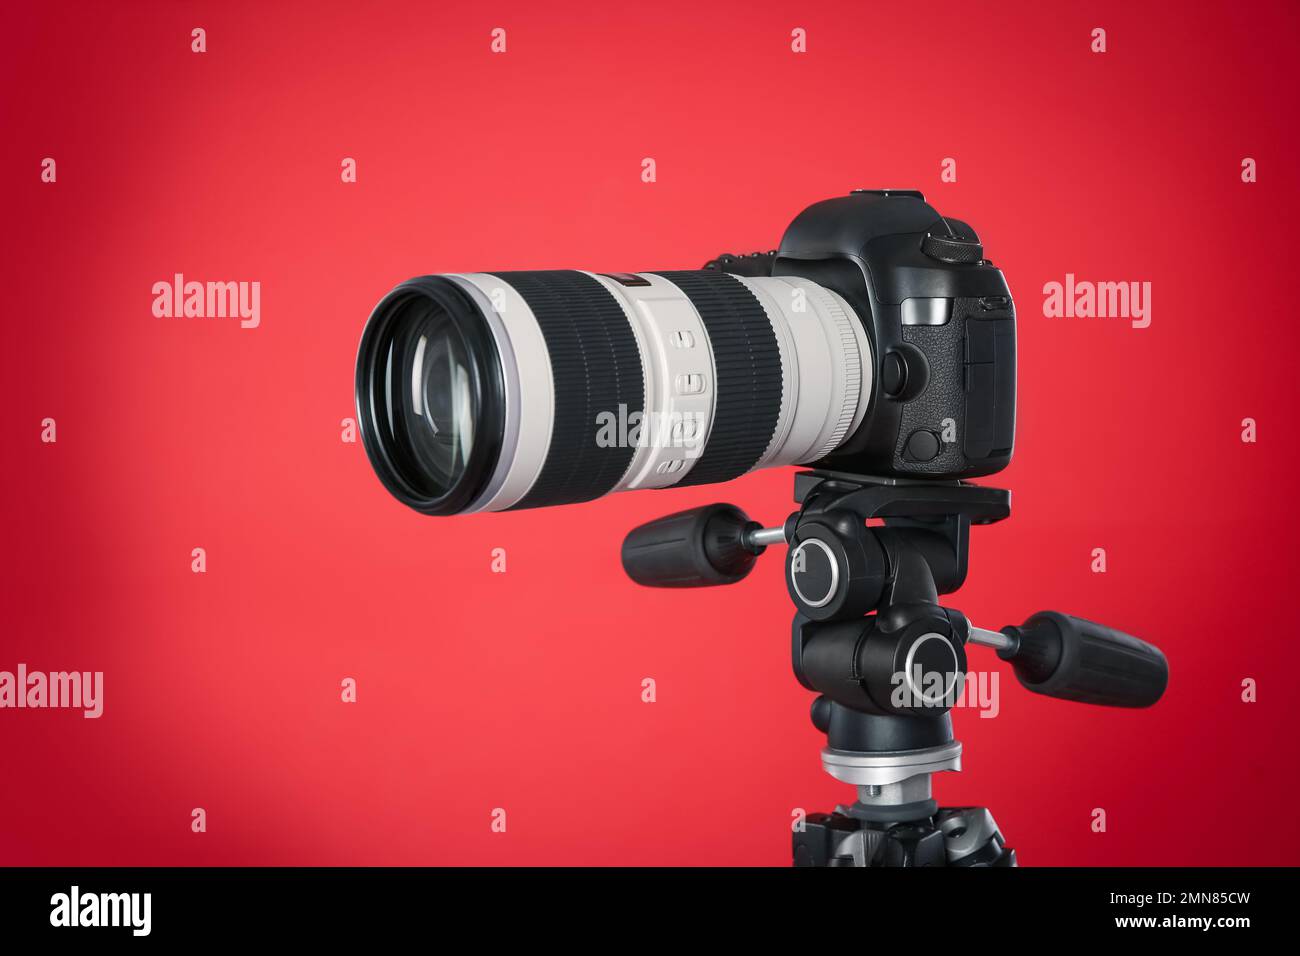 Modern professional video camera on red background Stock Photo